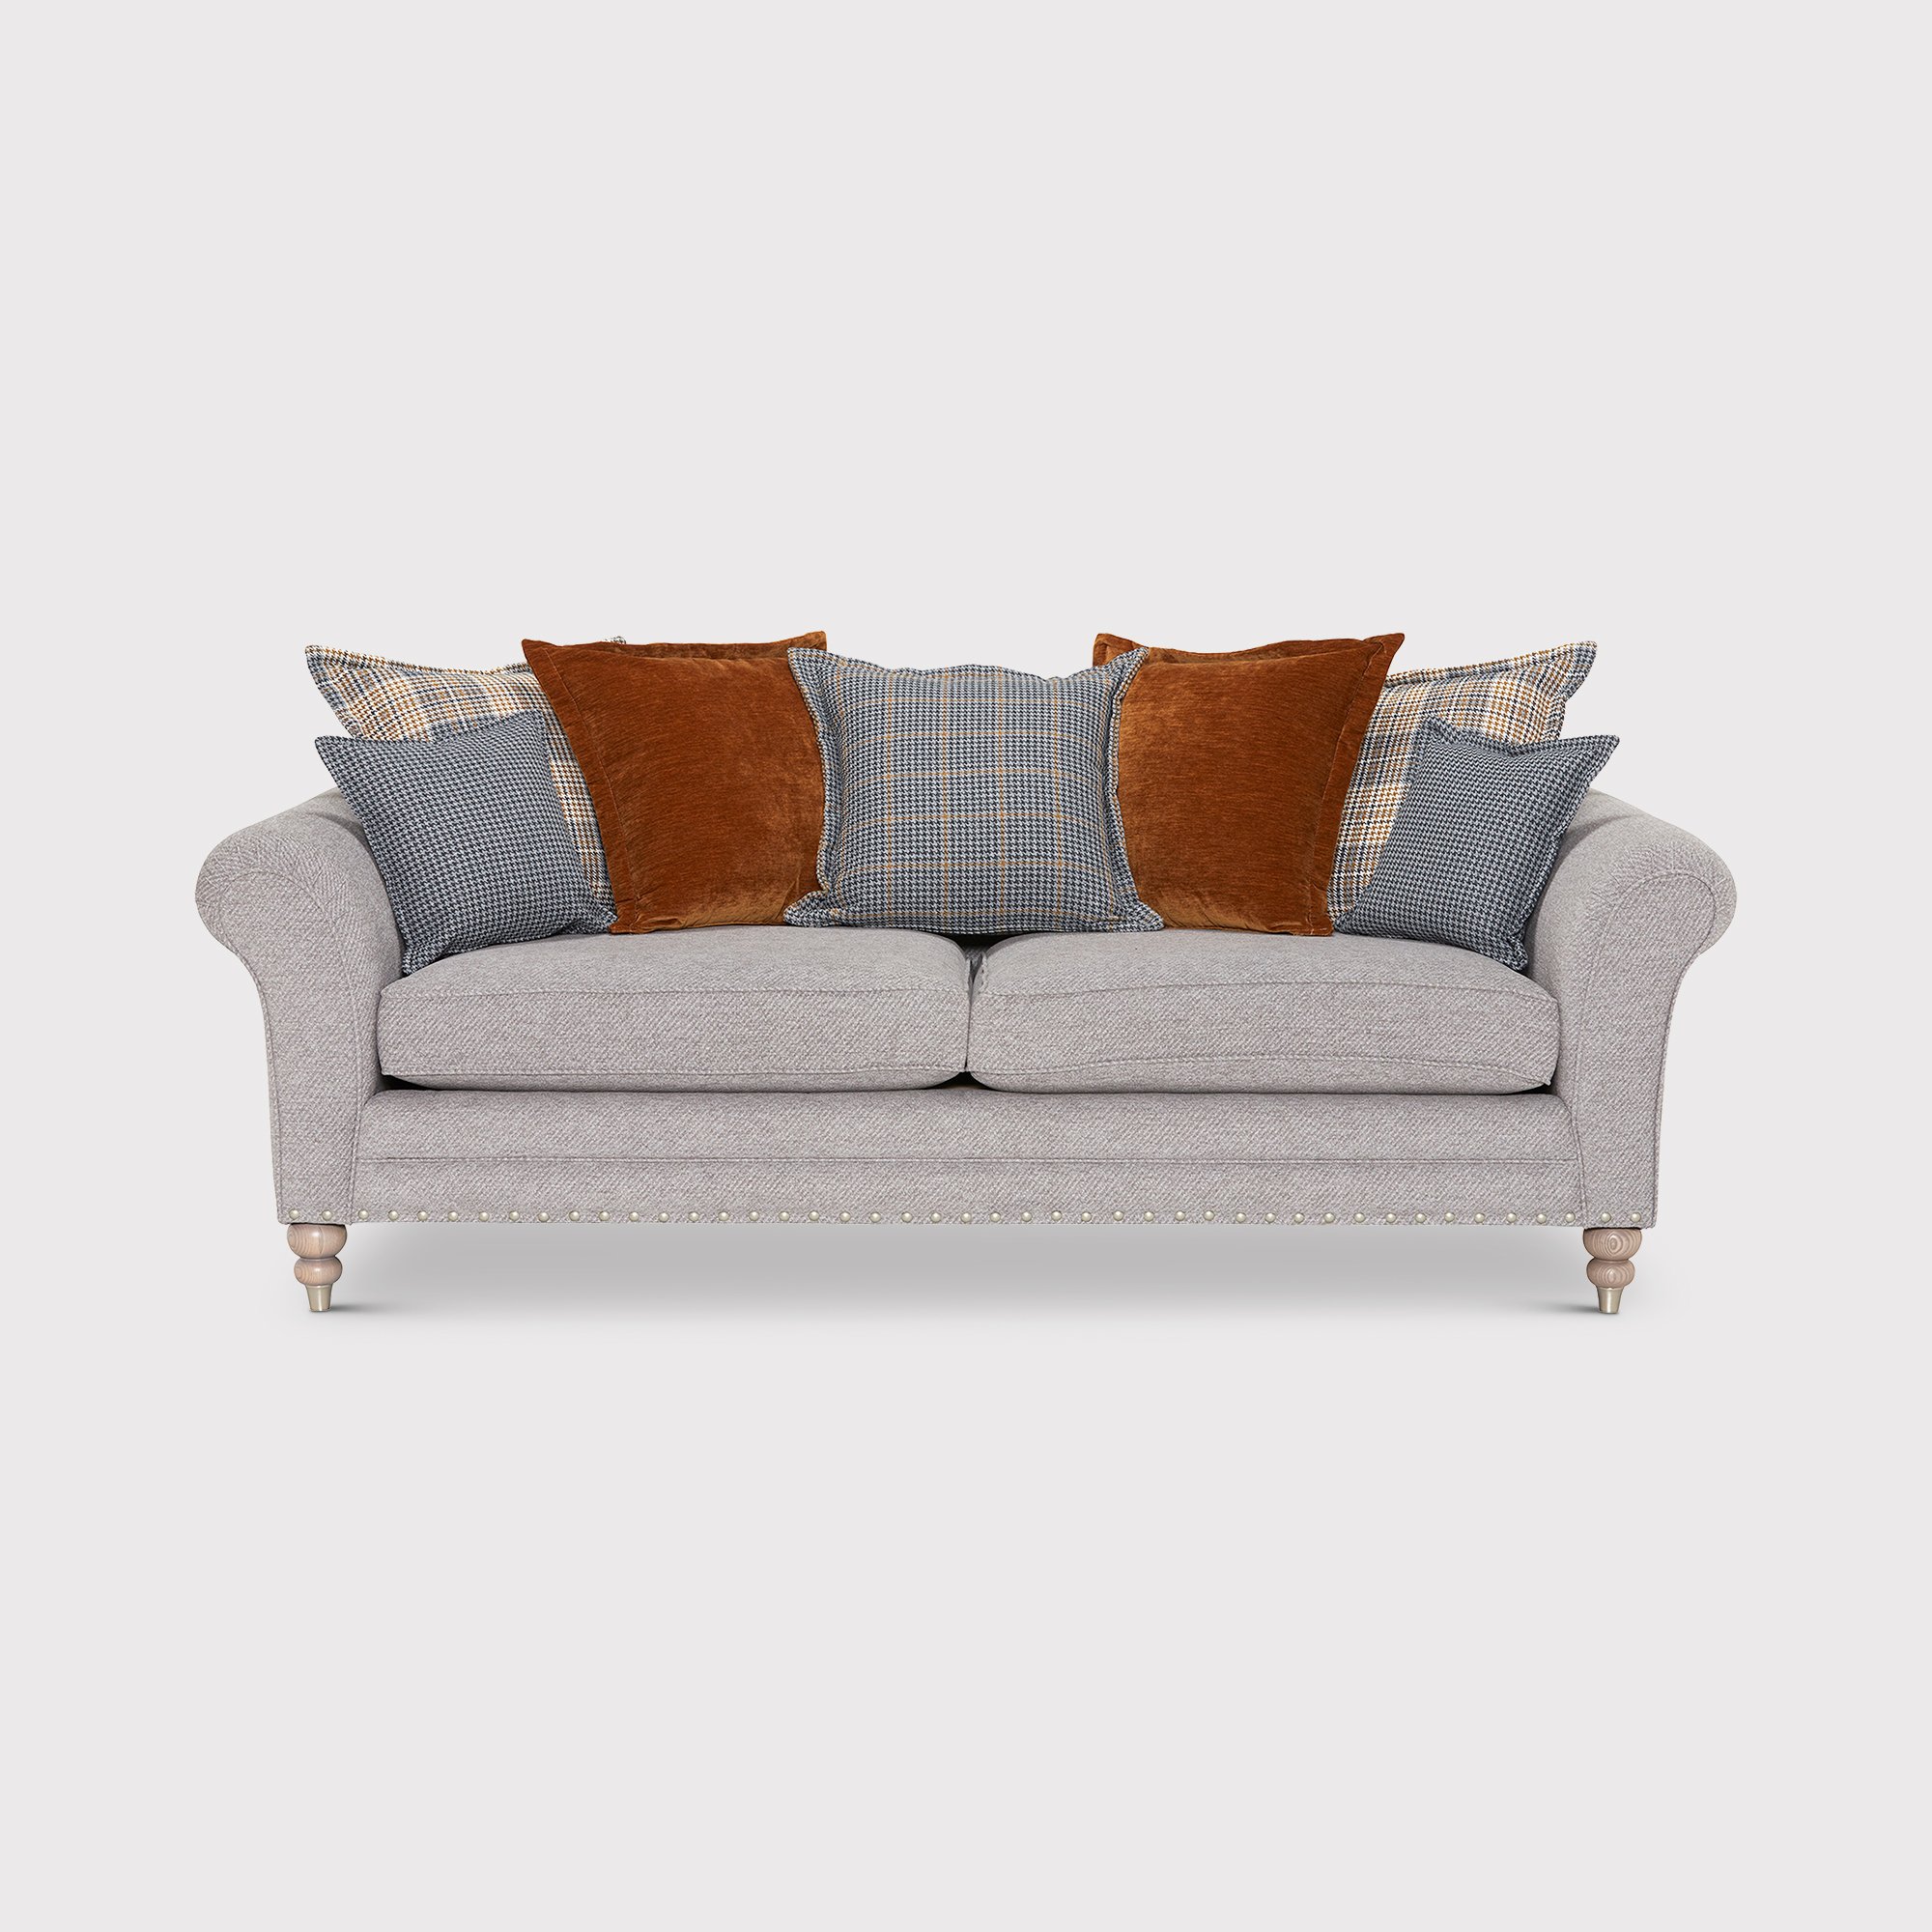 Bedale Grand Sofa Pillow Back, Neutral Fabric | Barker & Stonehouse